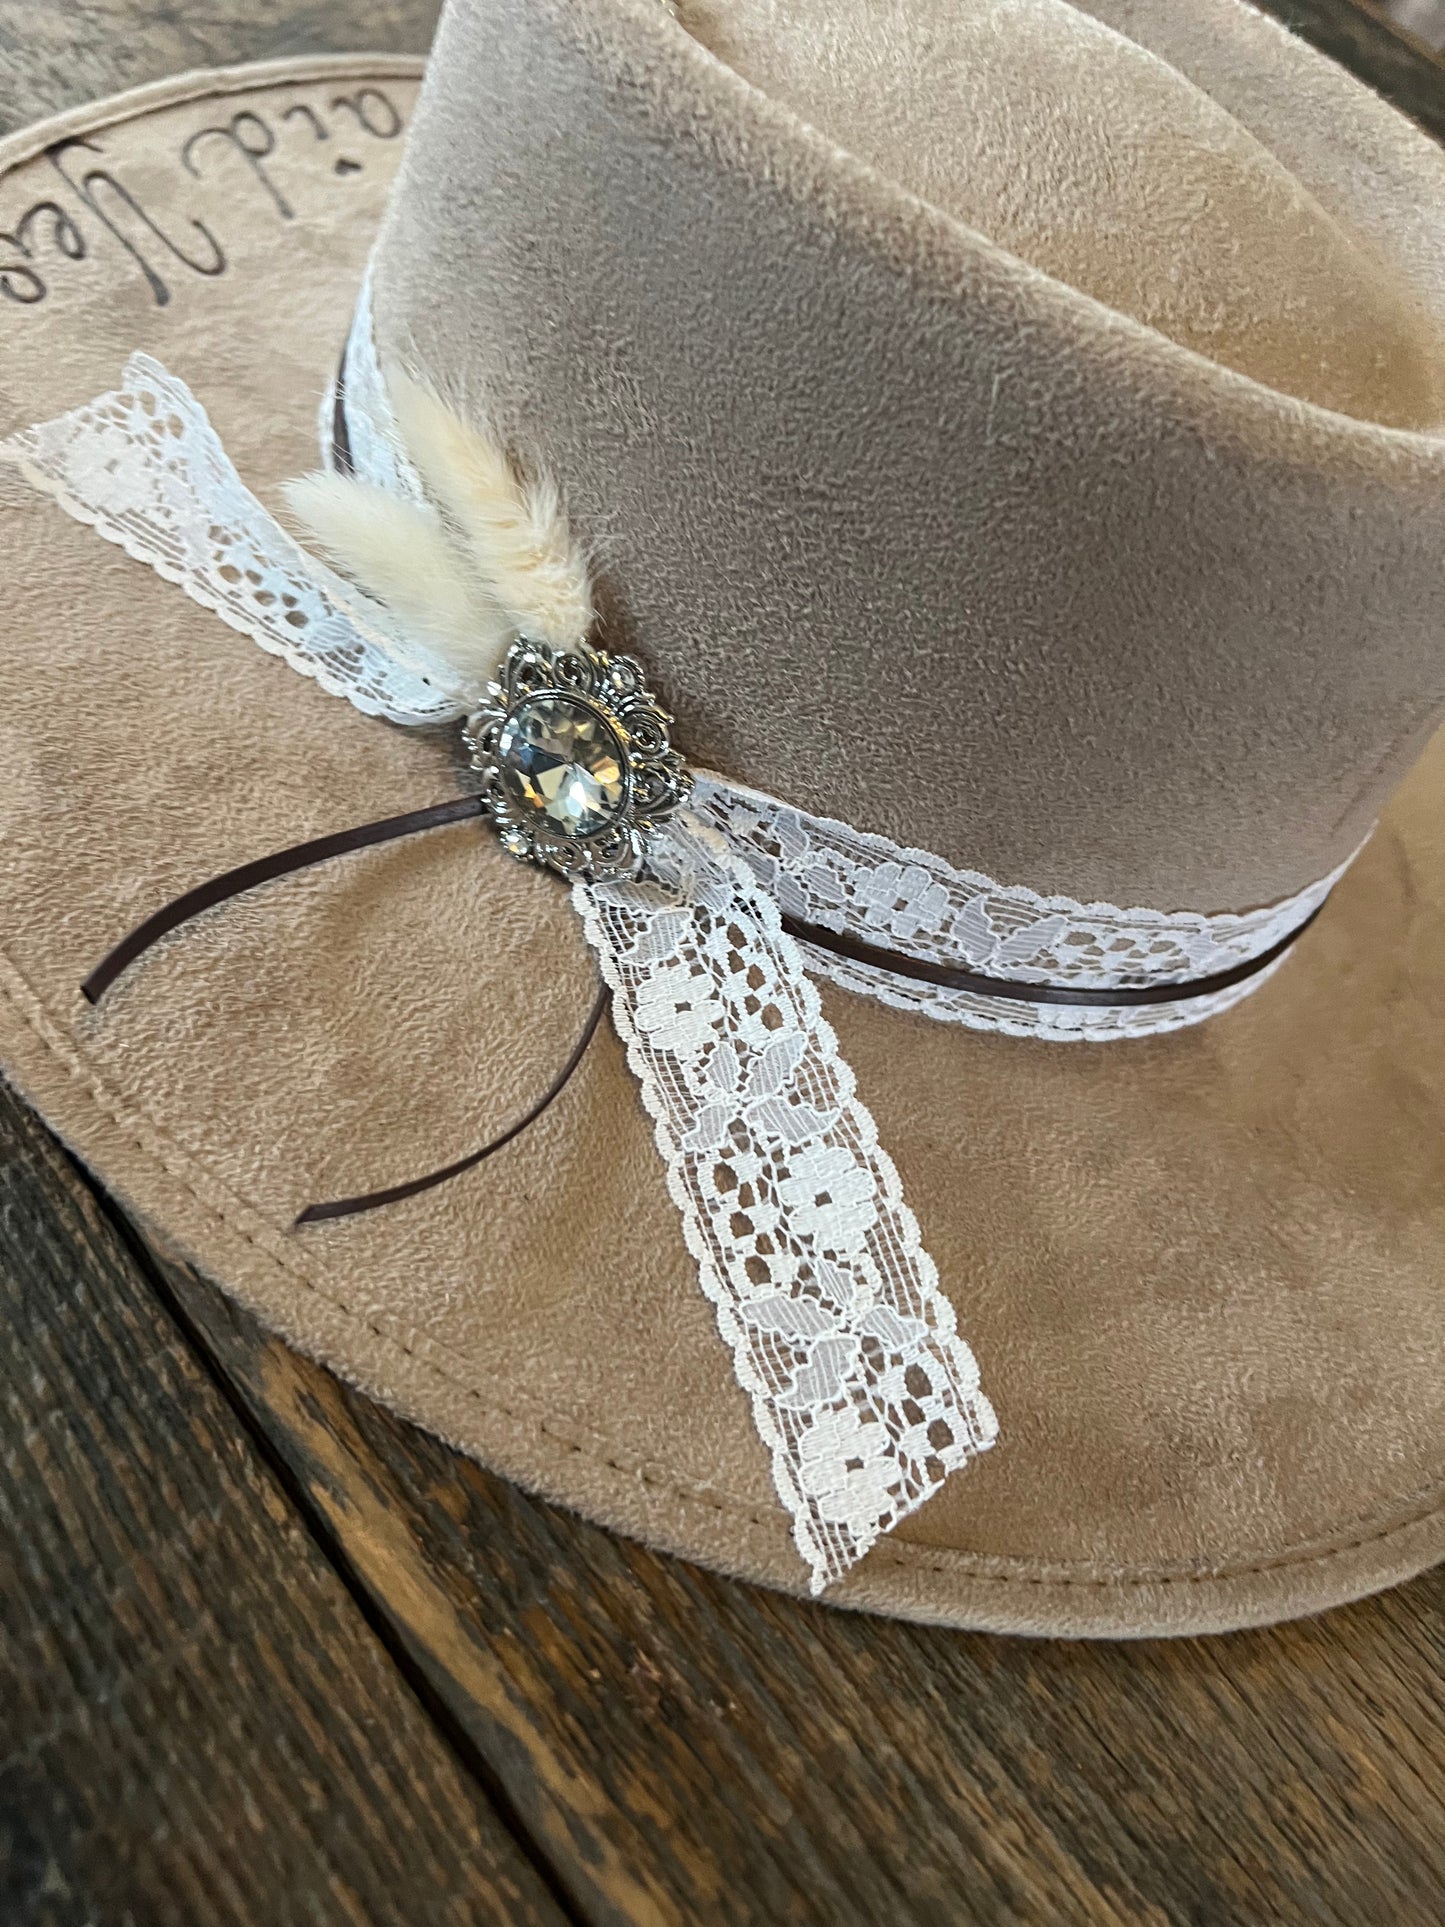 #143 - I Said Yes - Western or Rancher Hat